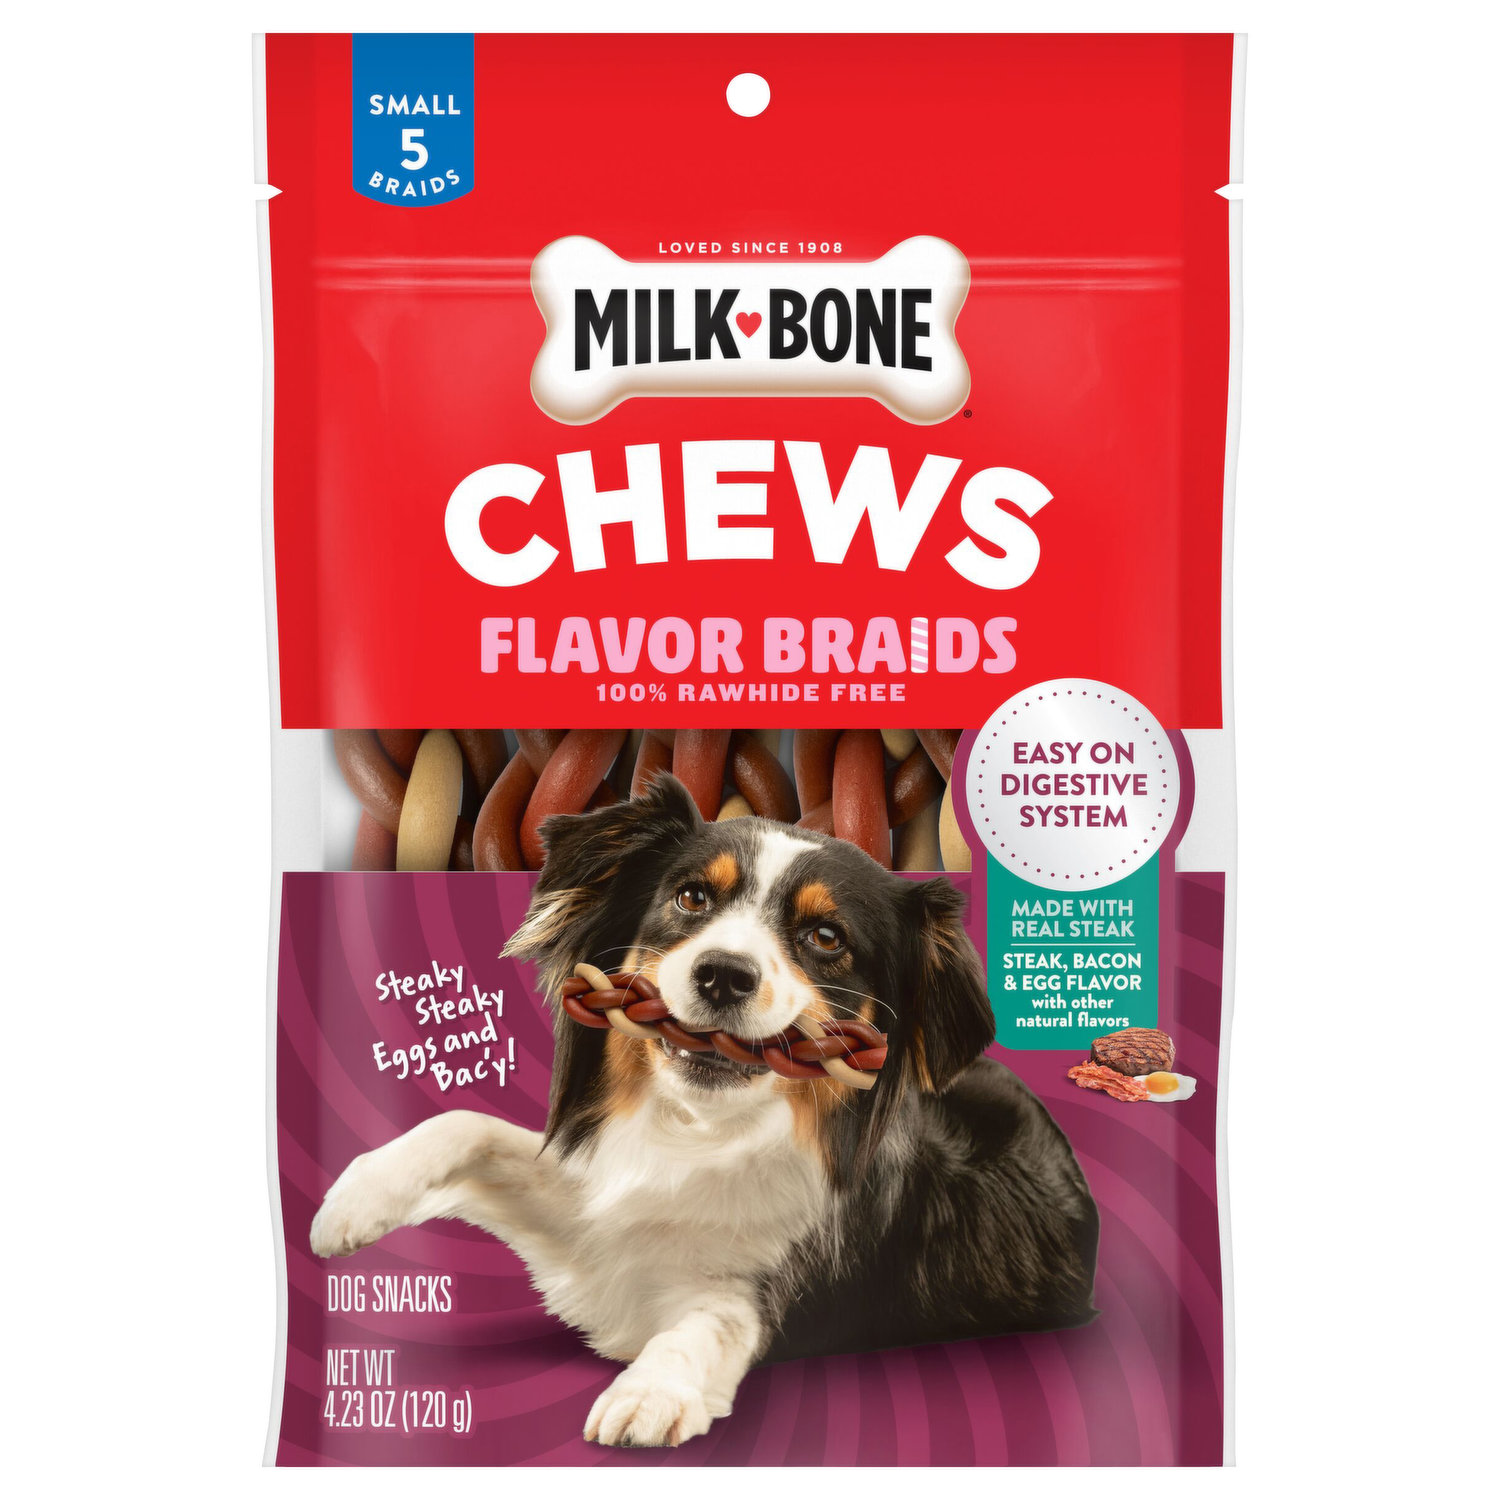 RECIPE: Healthy Frozen Goat Milk Treats For Dogs That Help With Digestion -  Wear Wag Repeat